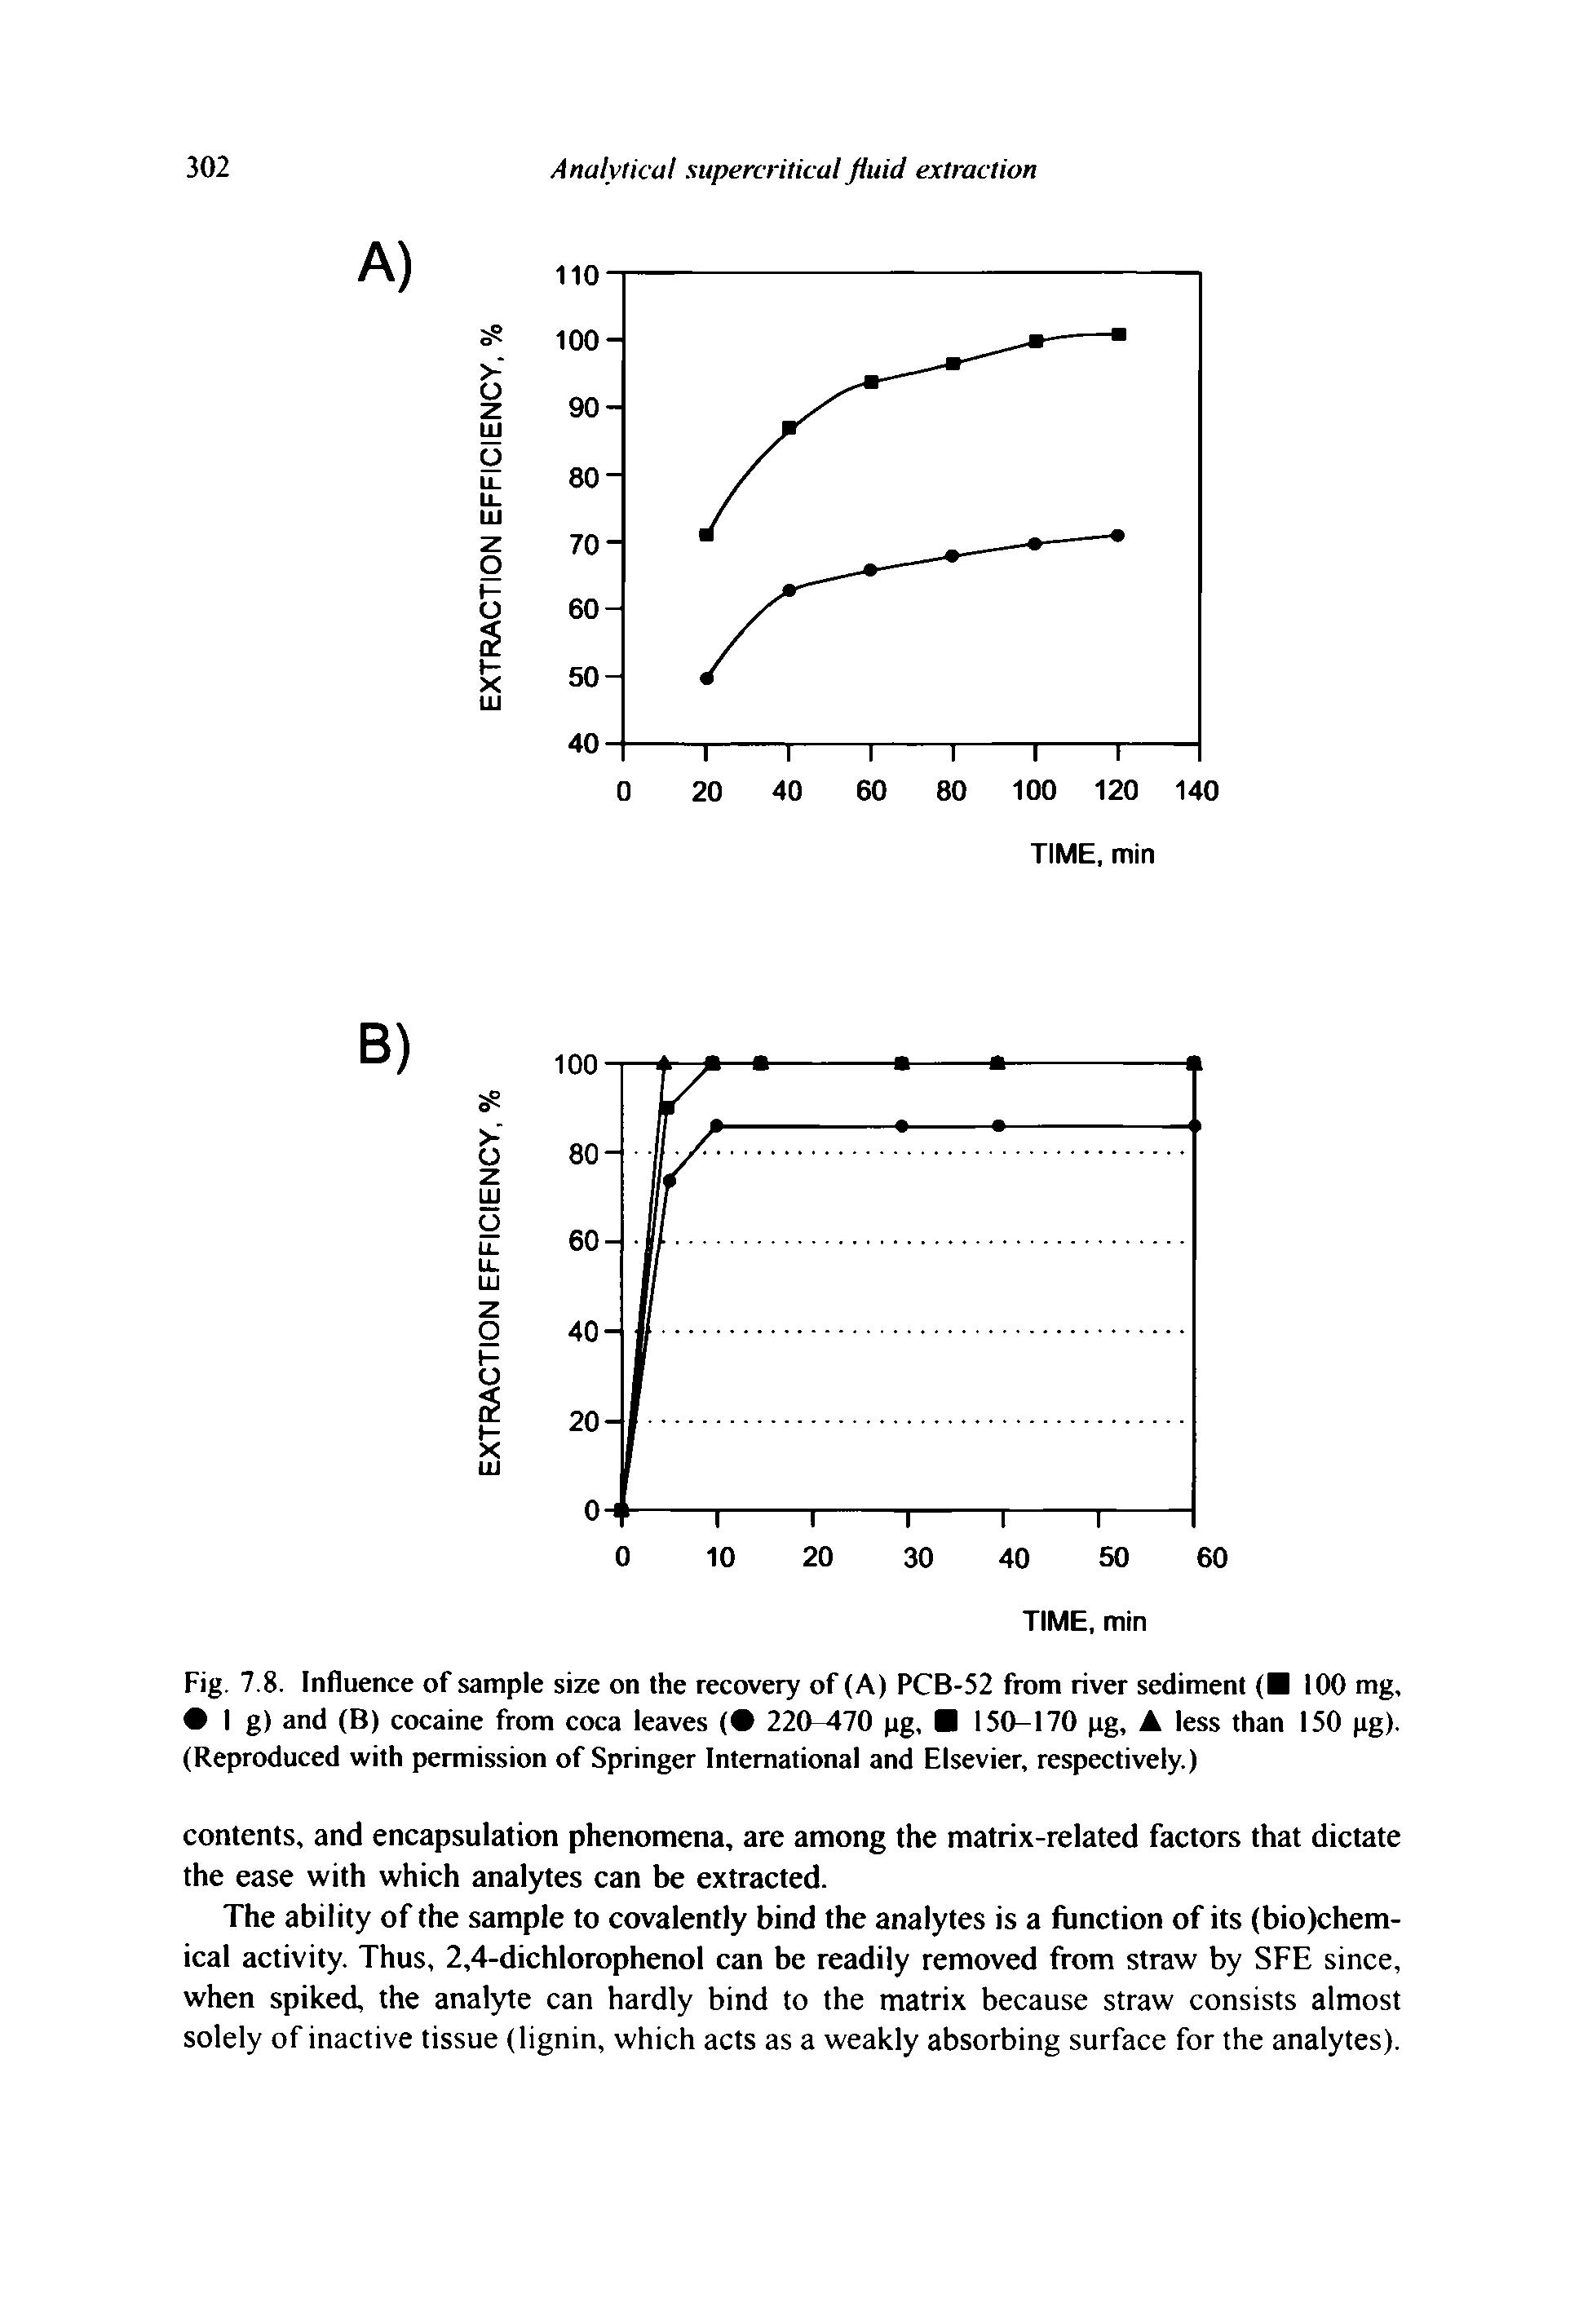 Fig. 7.8. Influence of sample size on the recovery of (A) PCB-52 from river sediment ( 100 mg, I g) and (B) cocaine from coca leaves ( 220-470 pg, 150-170 pg, A less than 150 pg). (Reproduced with permission of Springer International and Elsevier, respectively.)...